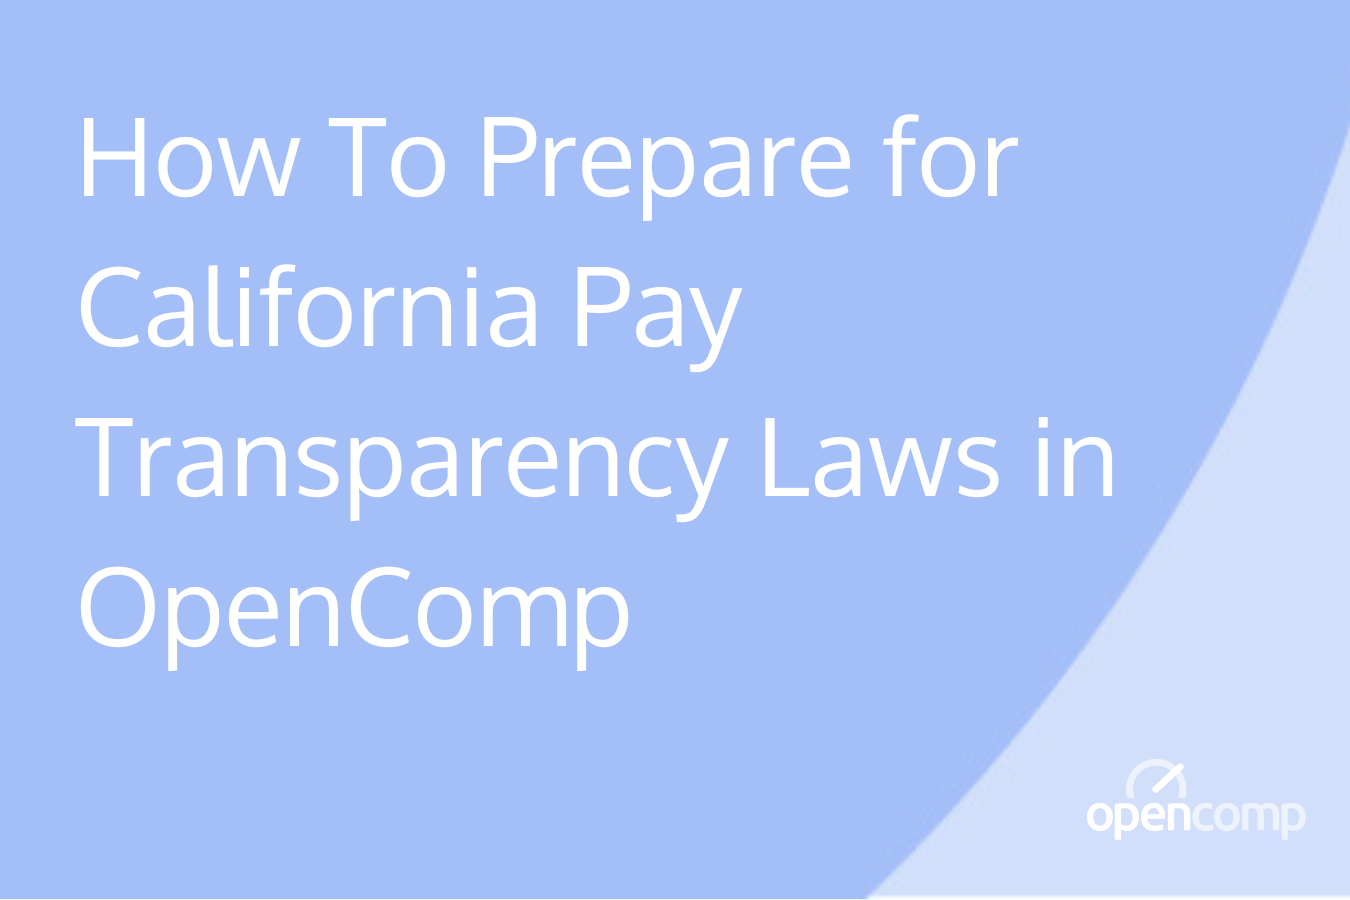 How To Prepare for California Pay Transparency Laws in OpenComp-1